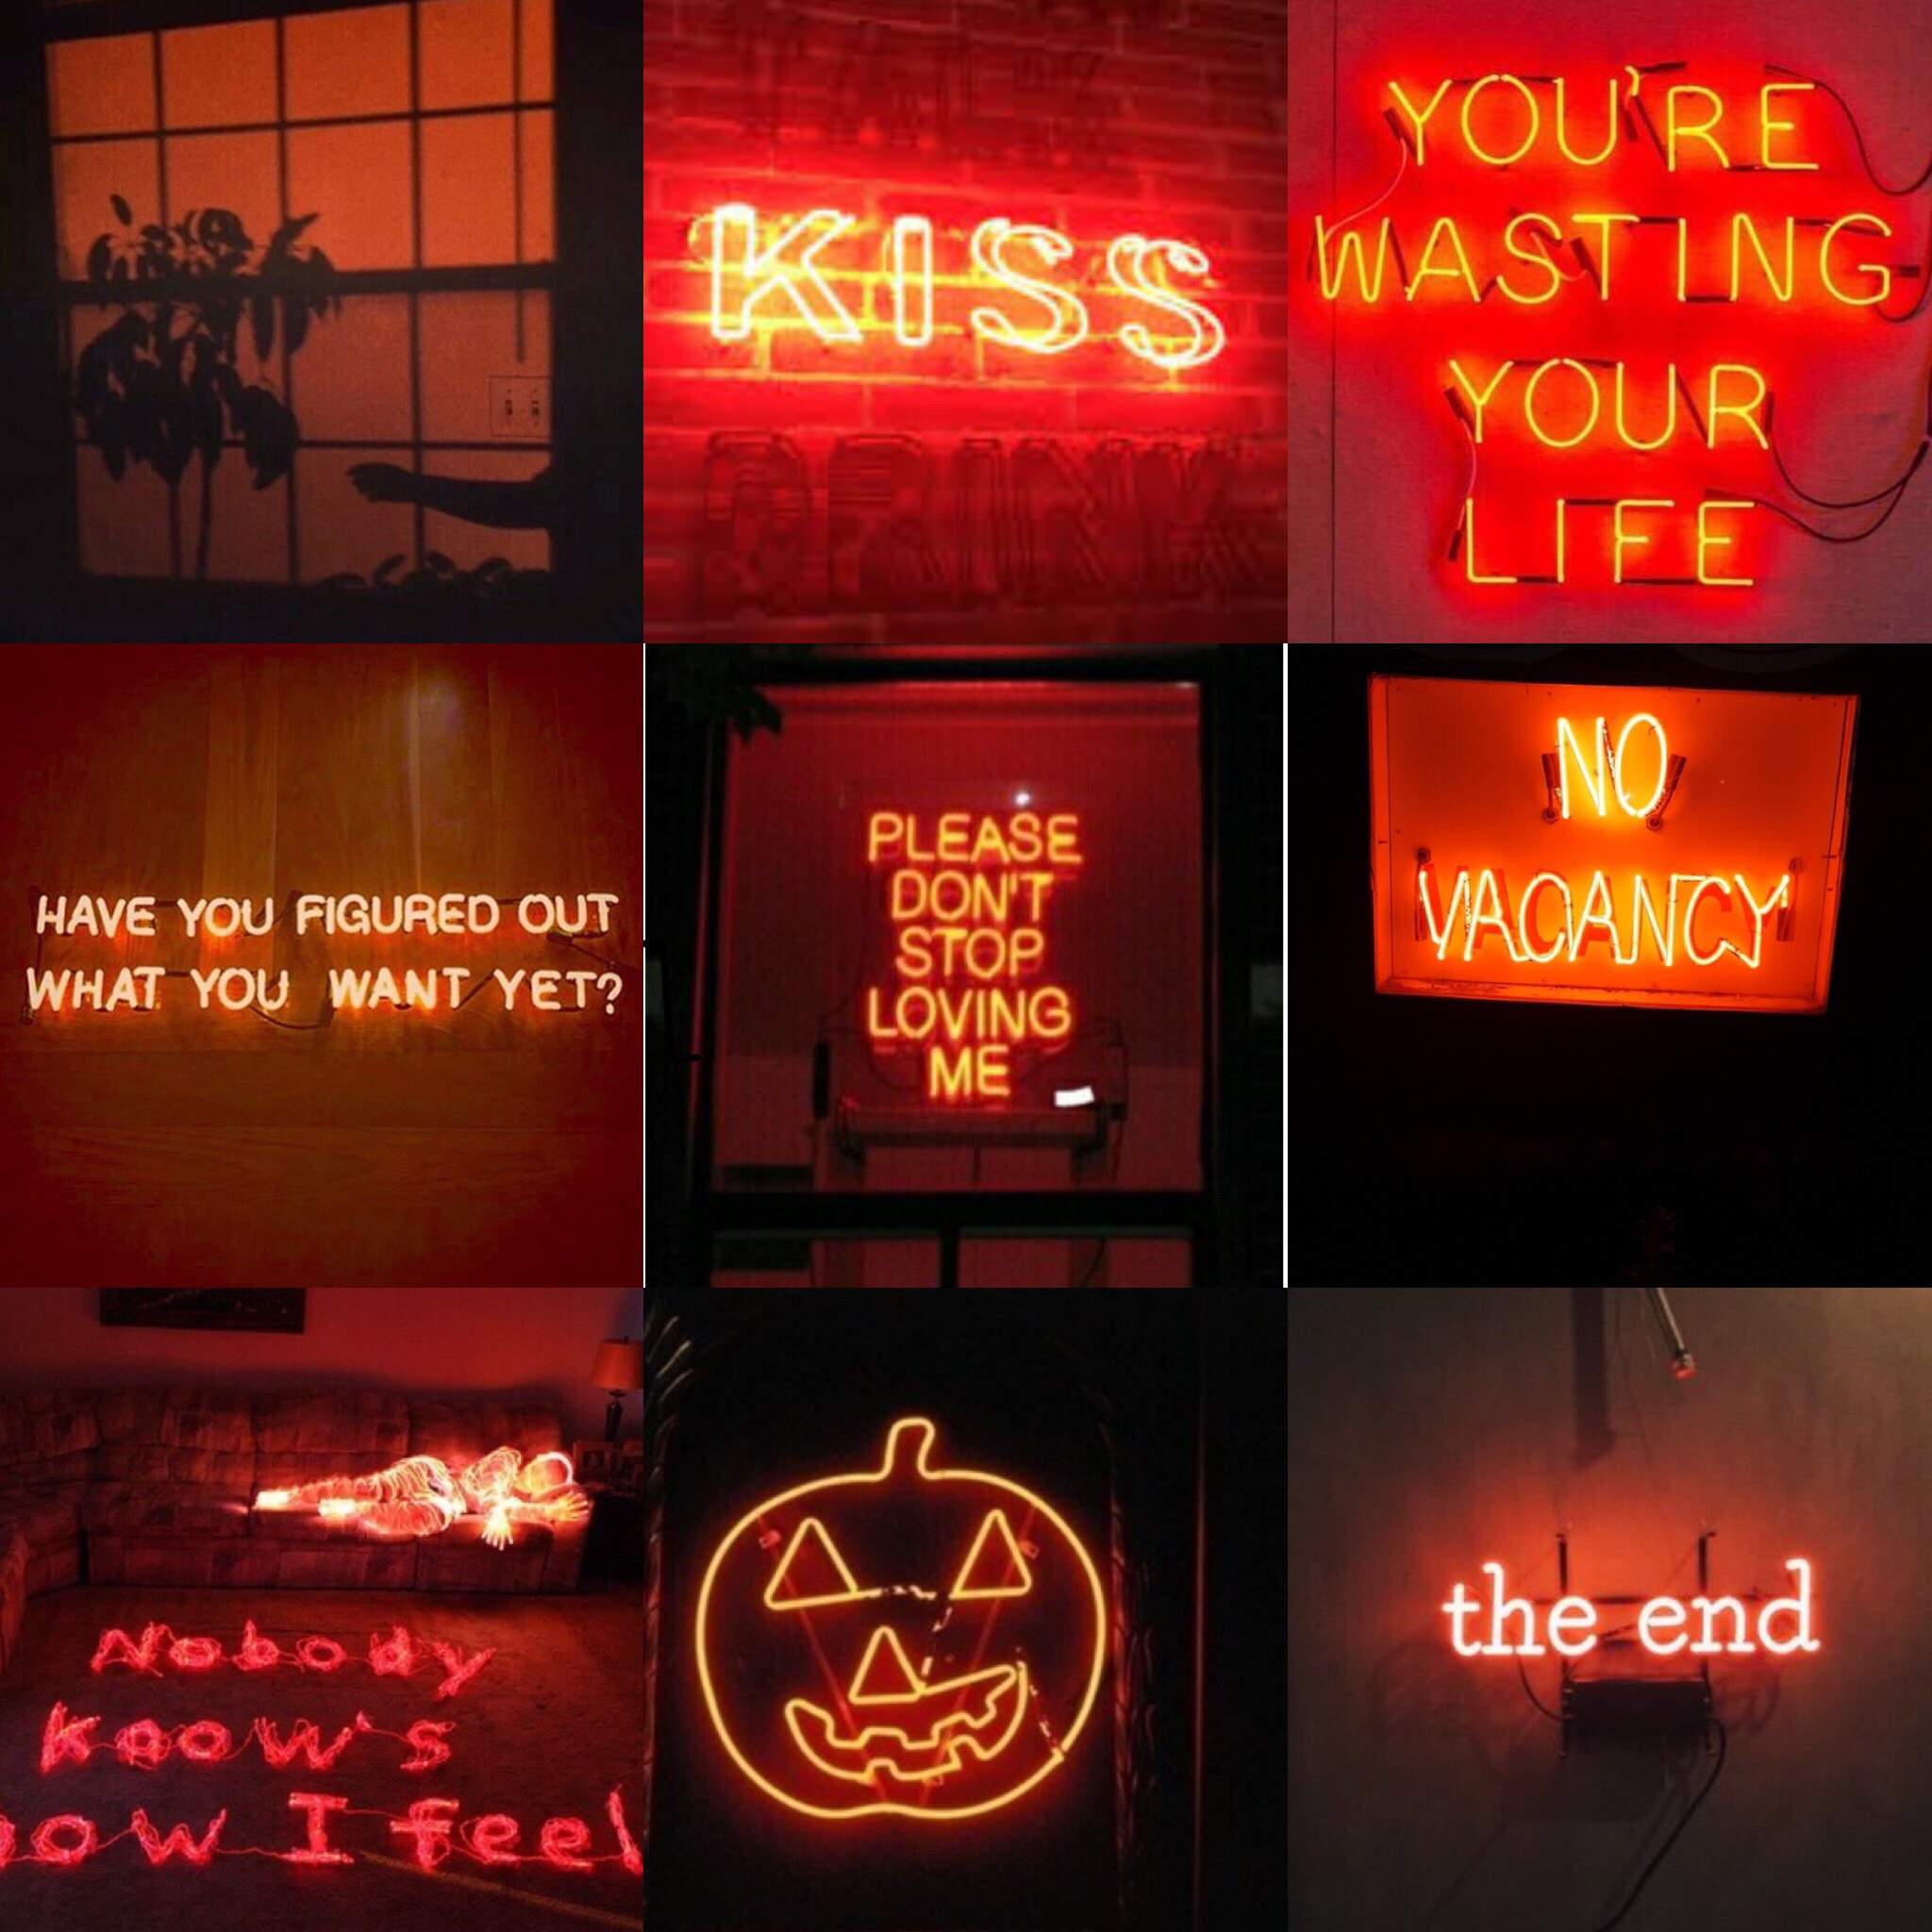 Aesthetic red neon signs with different sayings - Neon orange